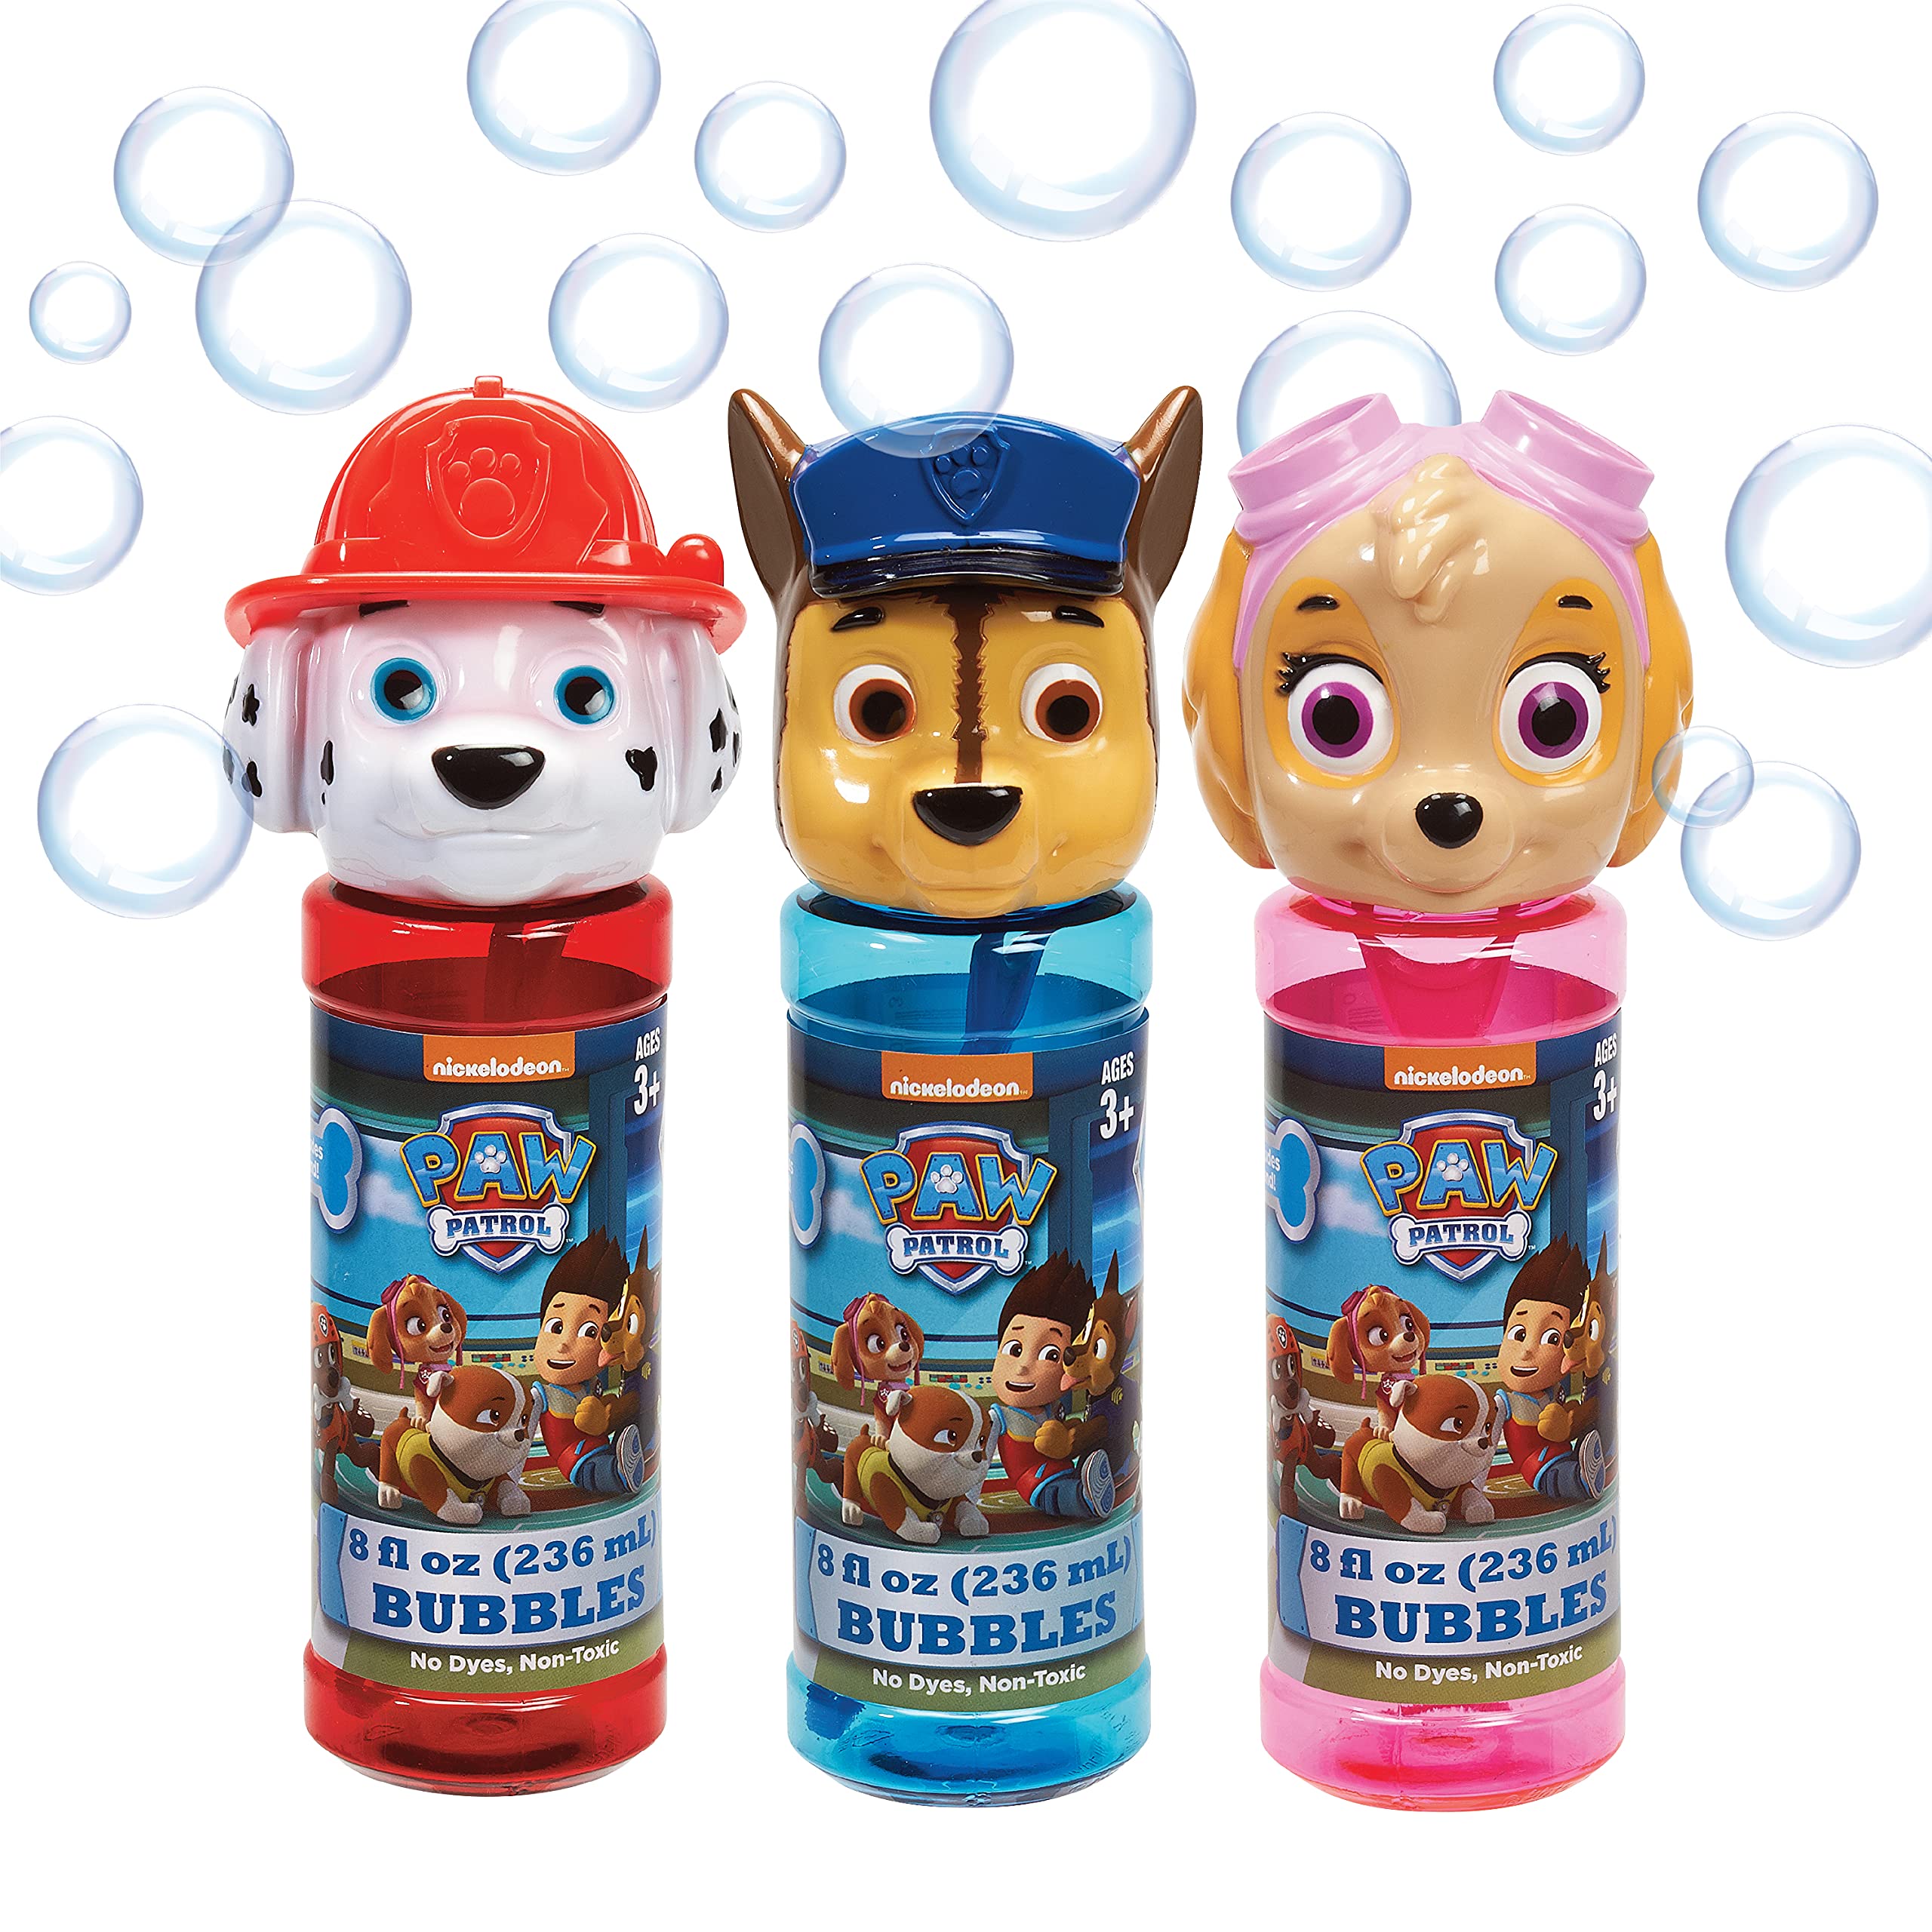 Bundle of 3 |Little Kids Paw Patrol Skye Marshall Chase 8oz Bubbles and Wand Character